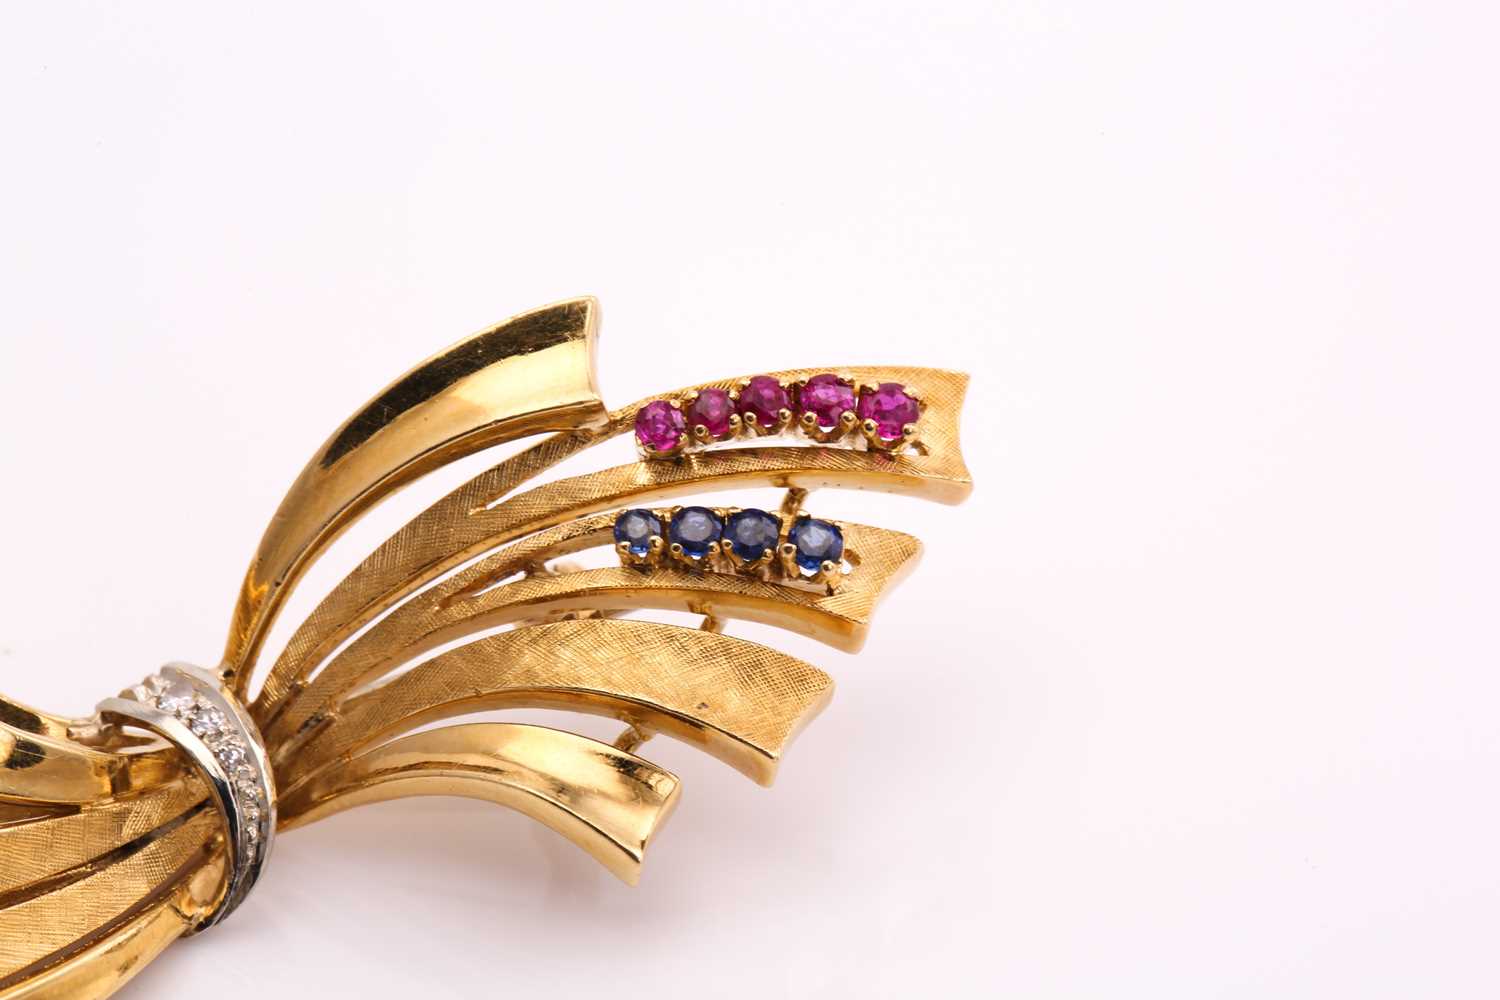 An 18ct bi-coloured gold bow brooch with gemstone accents, consisting of small round sapphires and - Image 3 of 5